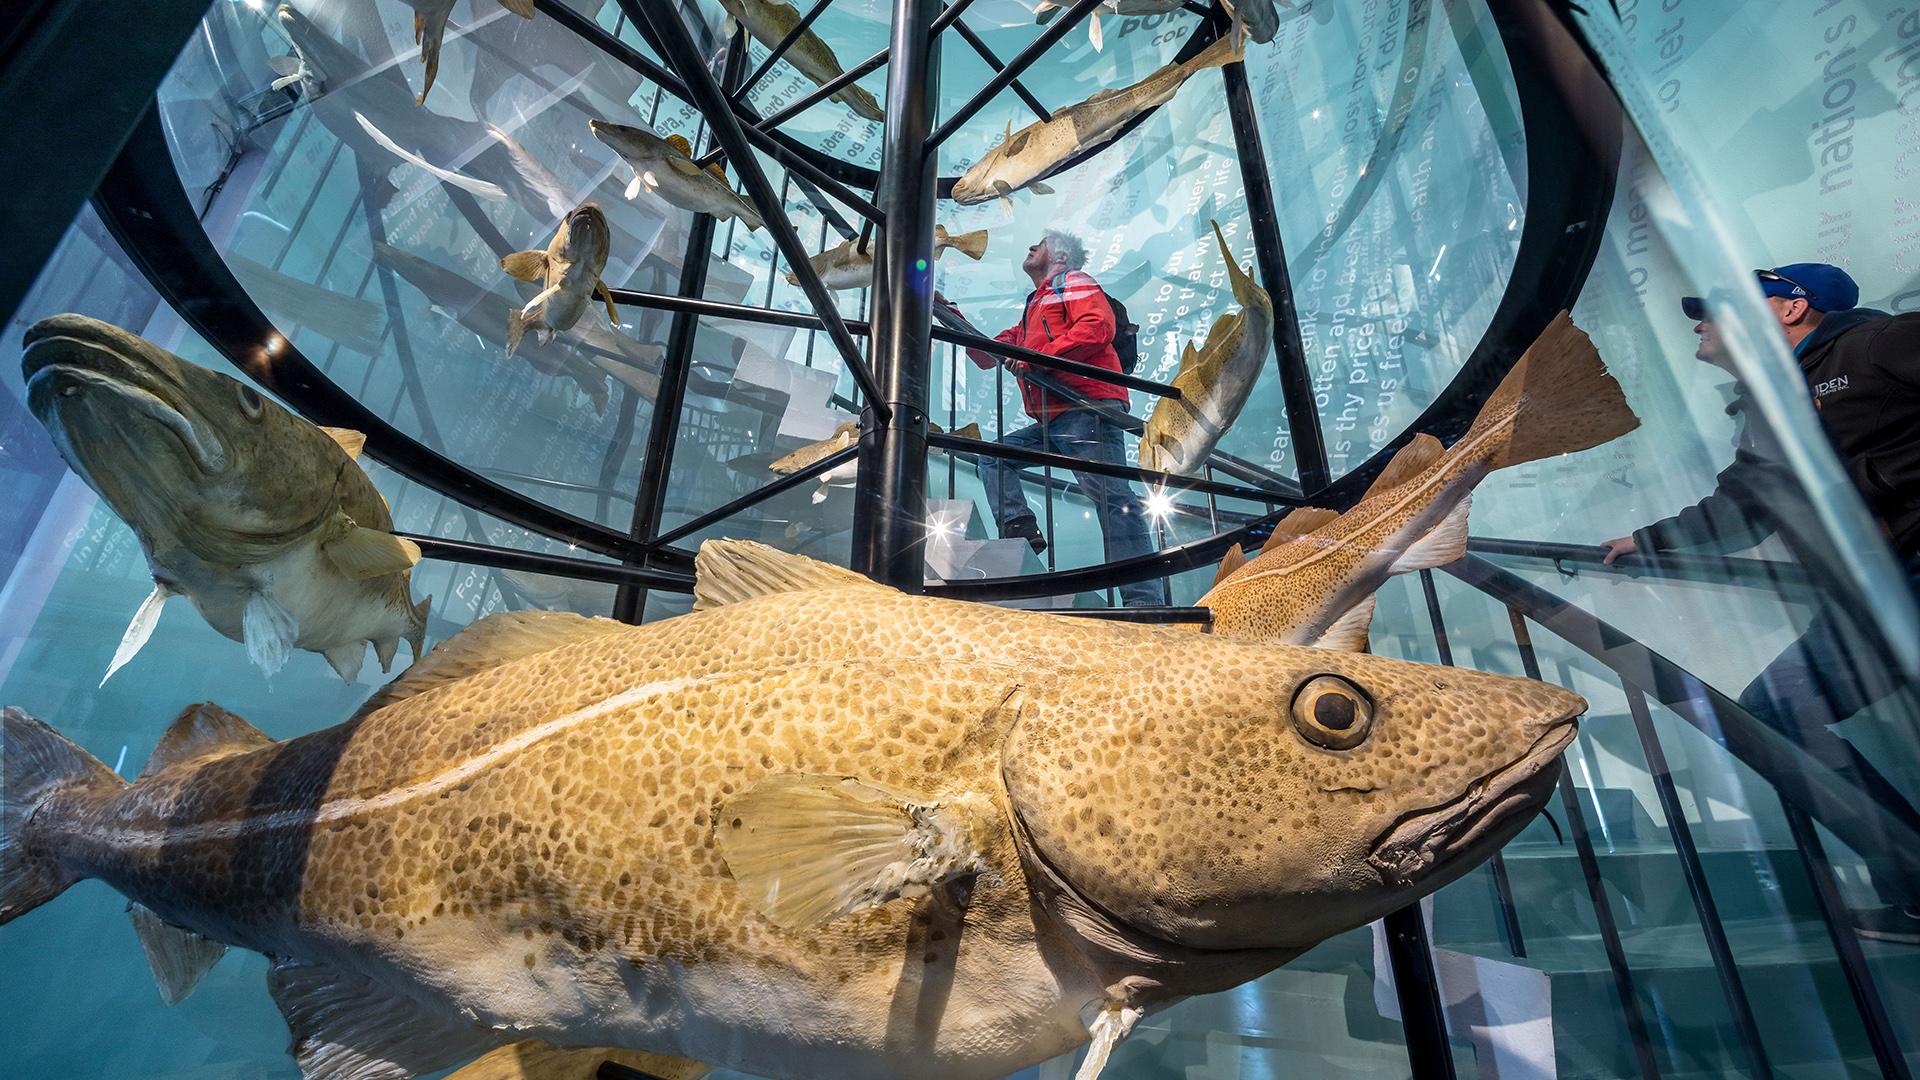 A Cod staircsase in the Maritime Museum in Reykjavik